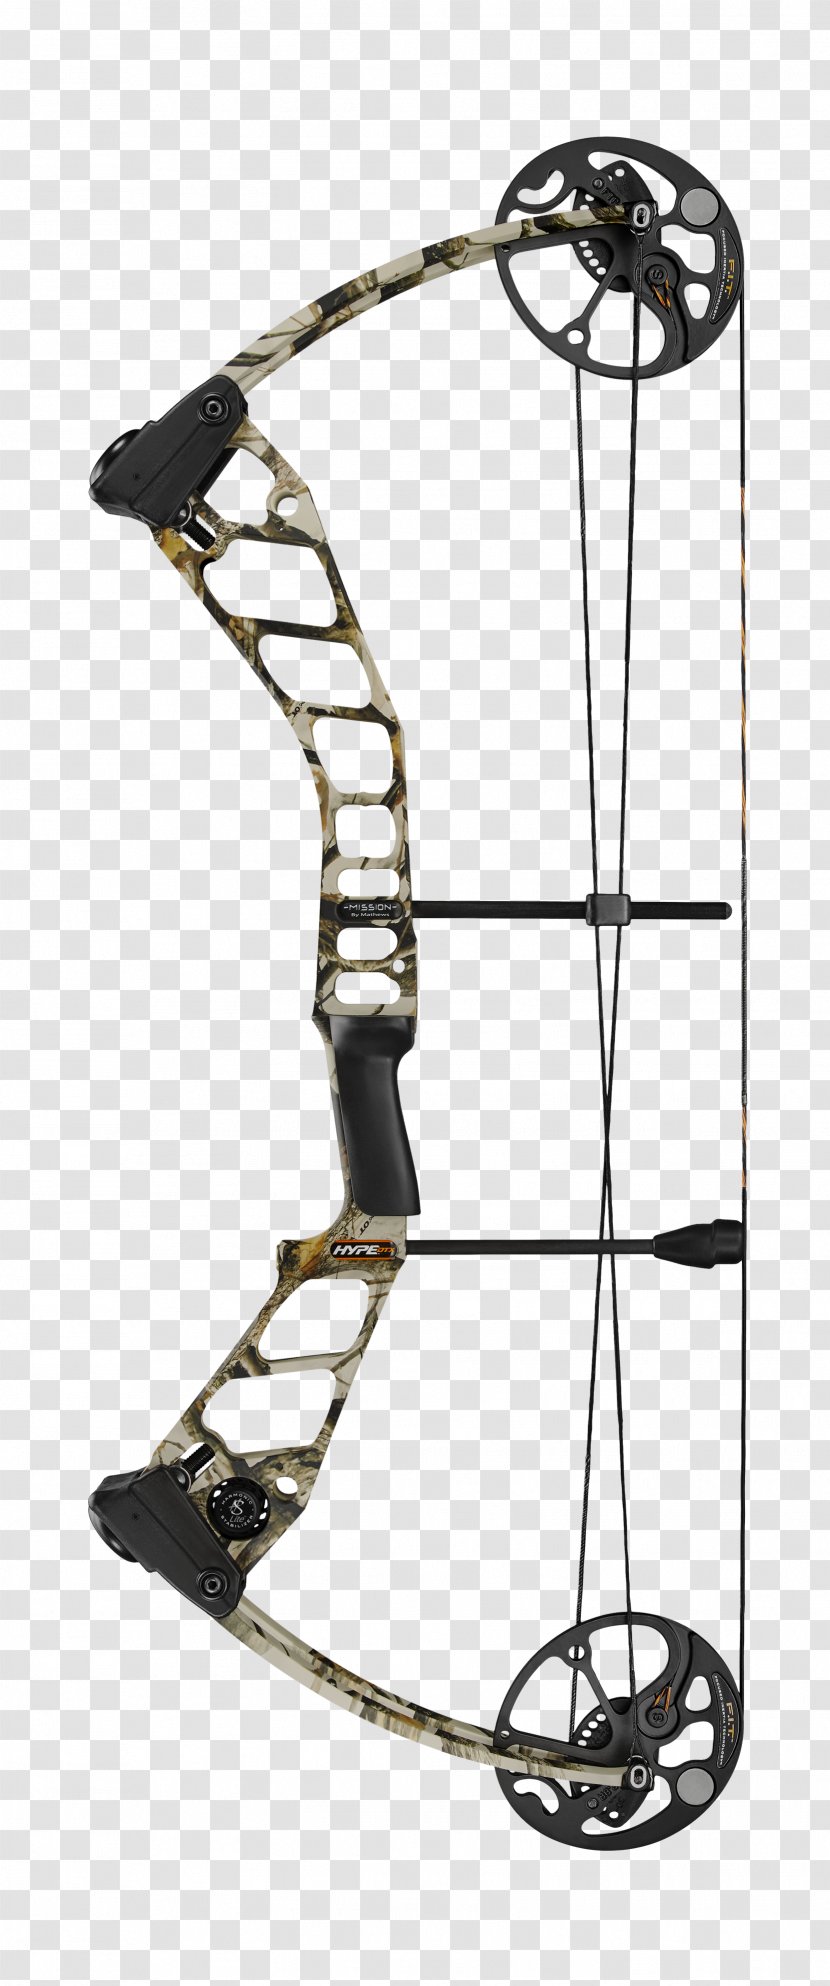 Compound Bows Archery Bow And Arrow Bowhunting - Pse - MISSION Transparent PNG